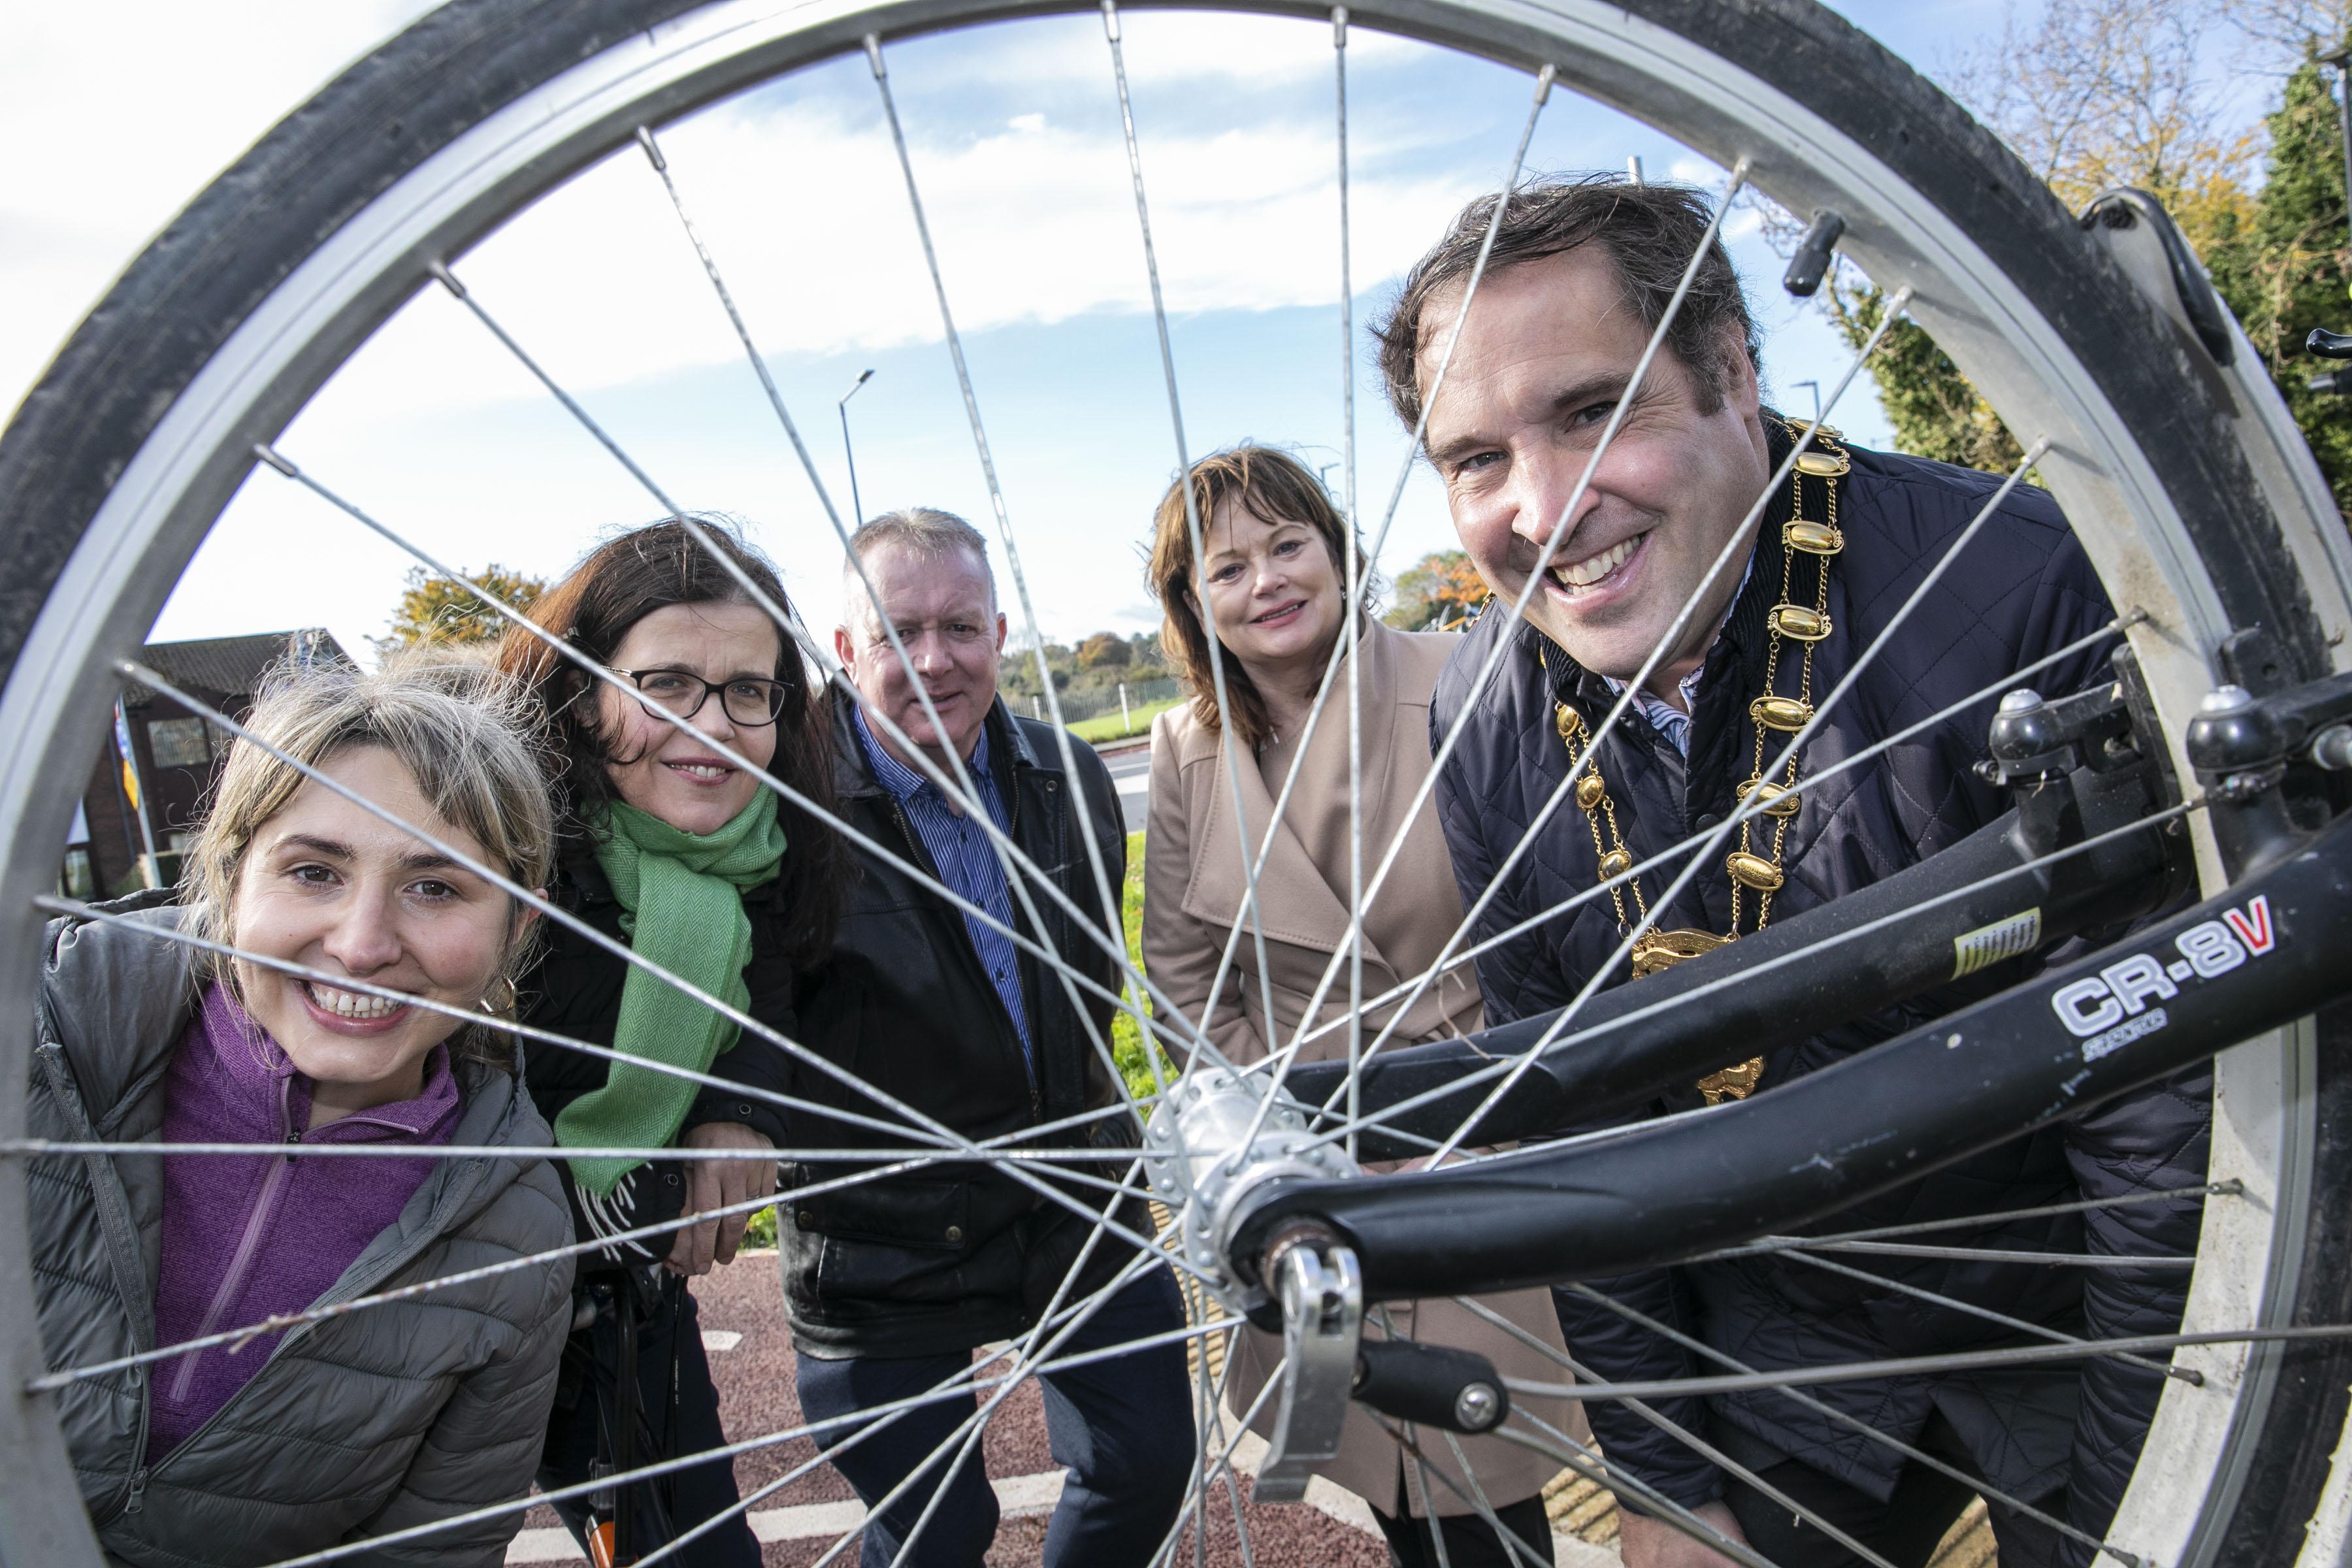 Mayor of Fingal Cllr Adrian Henchy with Chief Executive AnnMarie Farrelly and Active Travel staff